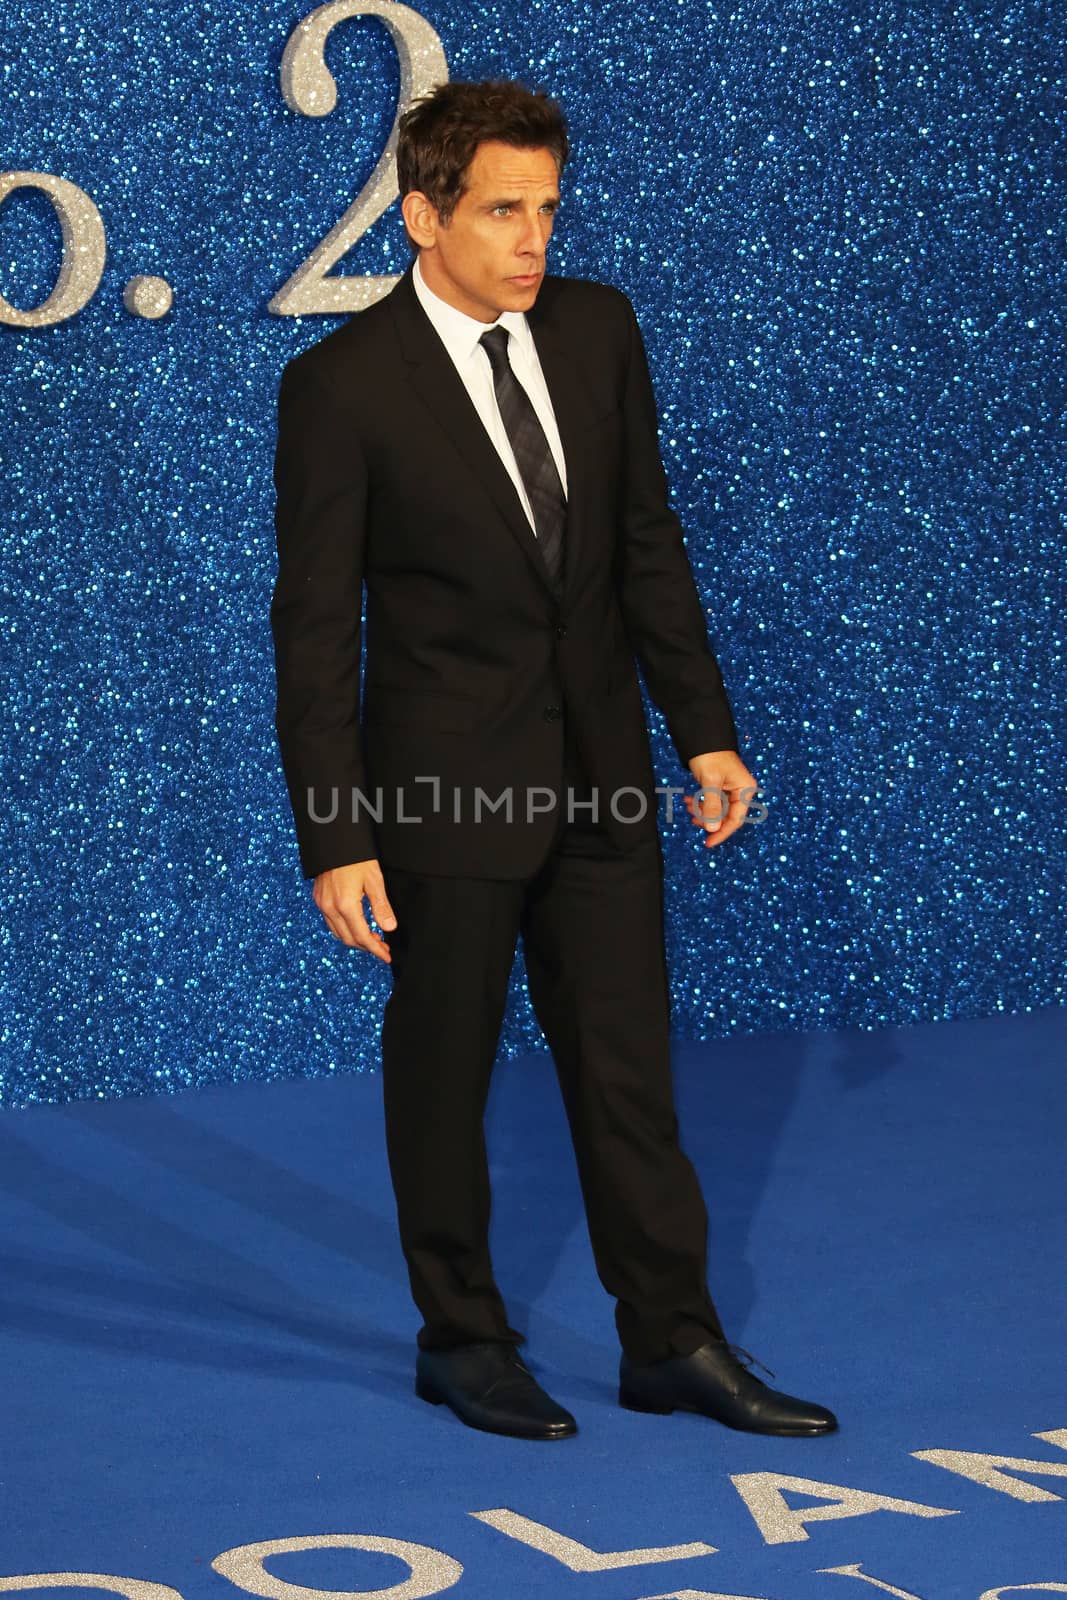 UK, London: Ben Stiller arrives on the blue carpet at Leicester Square in London on February 4, 2016 for a fashionable screening of Zoolander No. 2, the long-awaited sequel to Stiller's trademark hit.